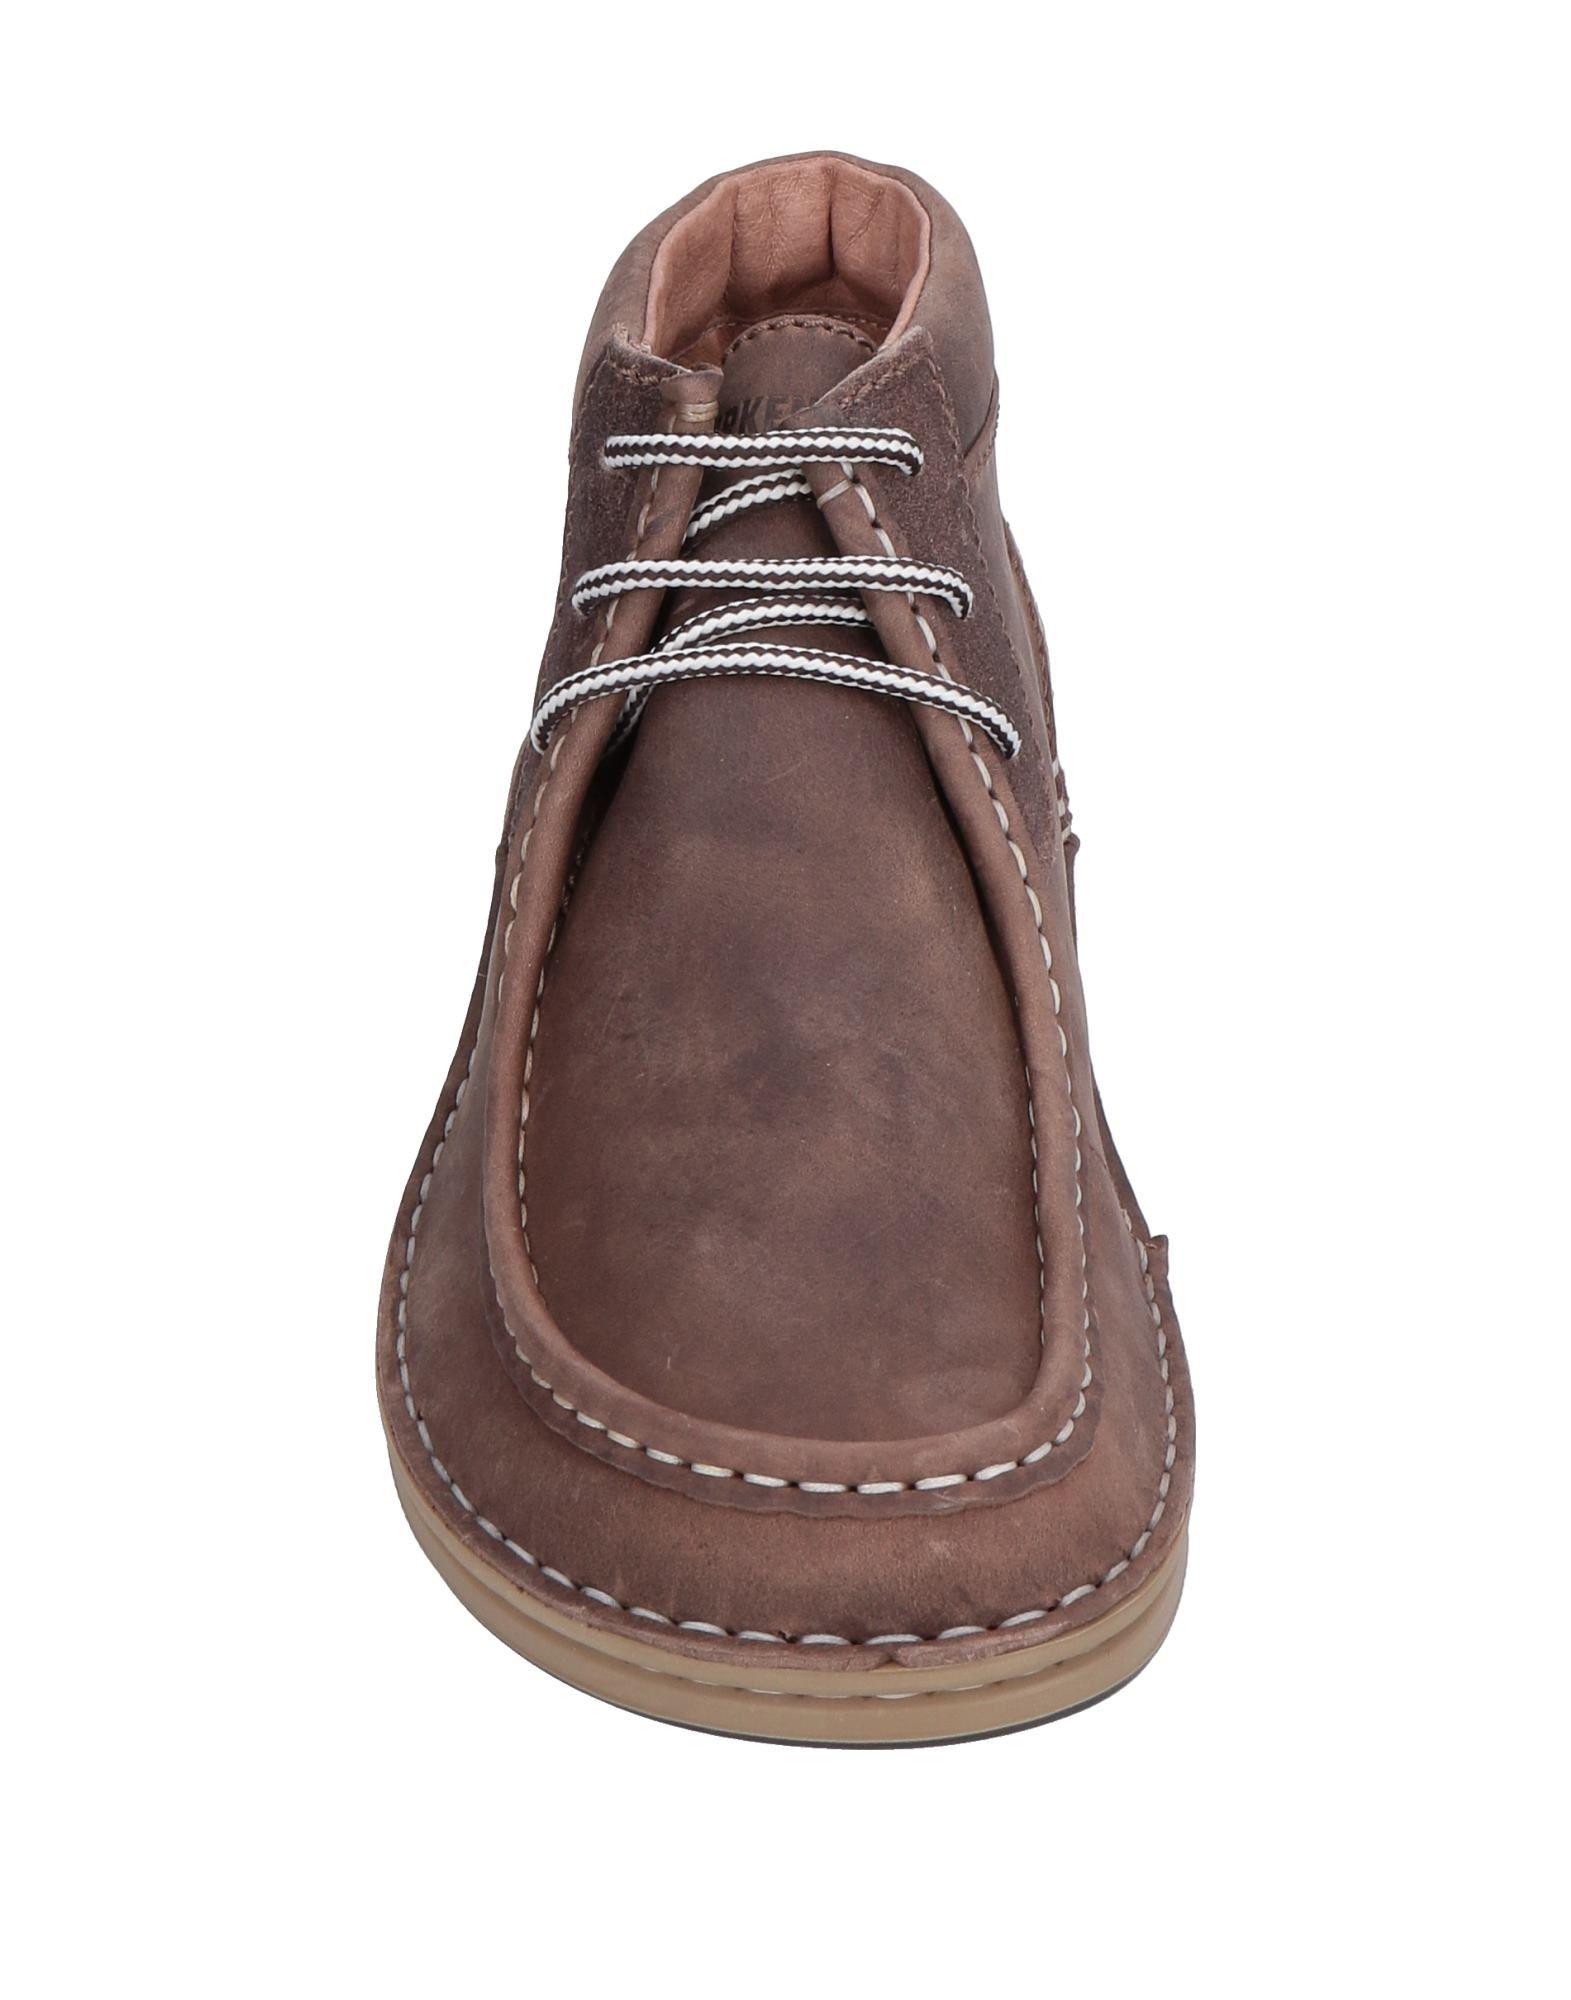 Birkenstock Leather Ankle Boots in Brown for Men - Lyst